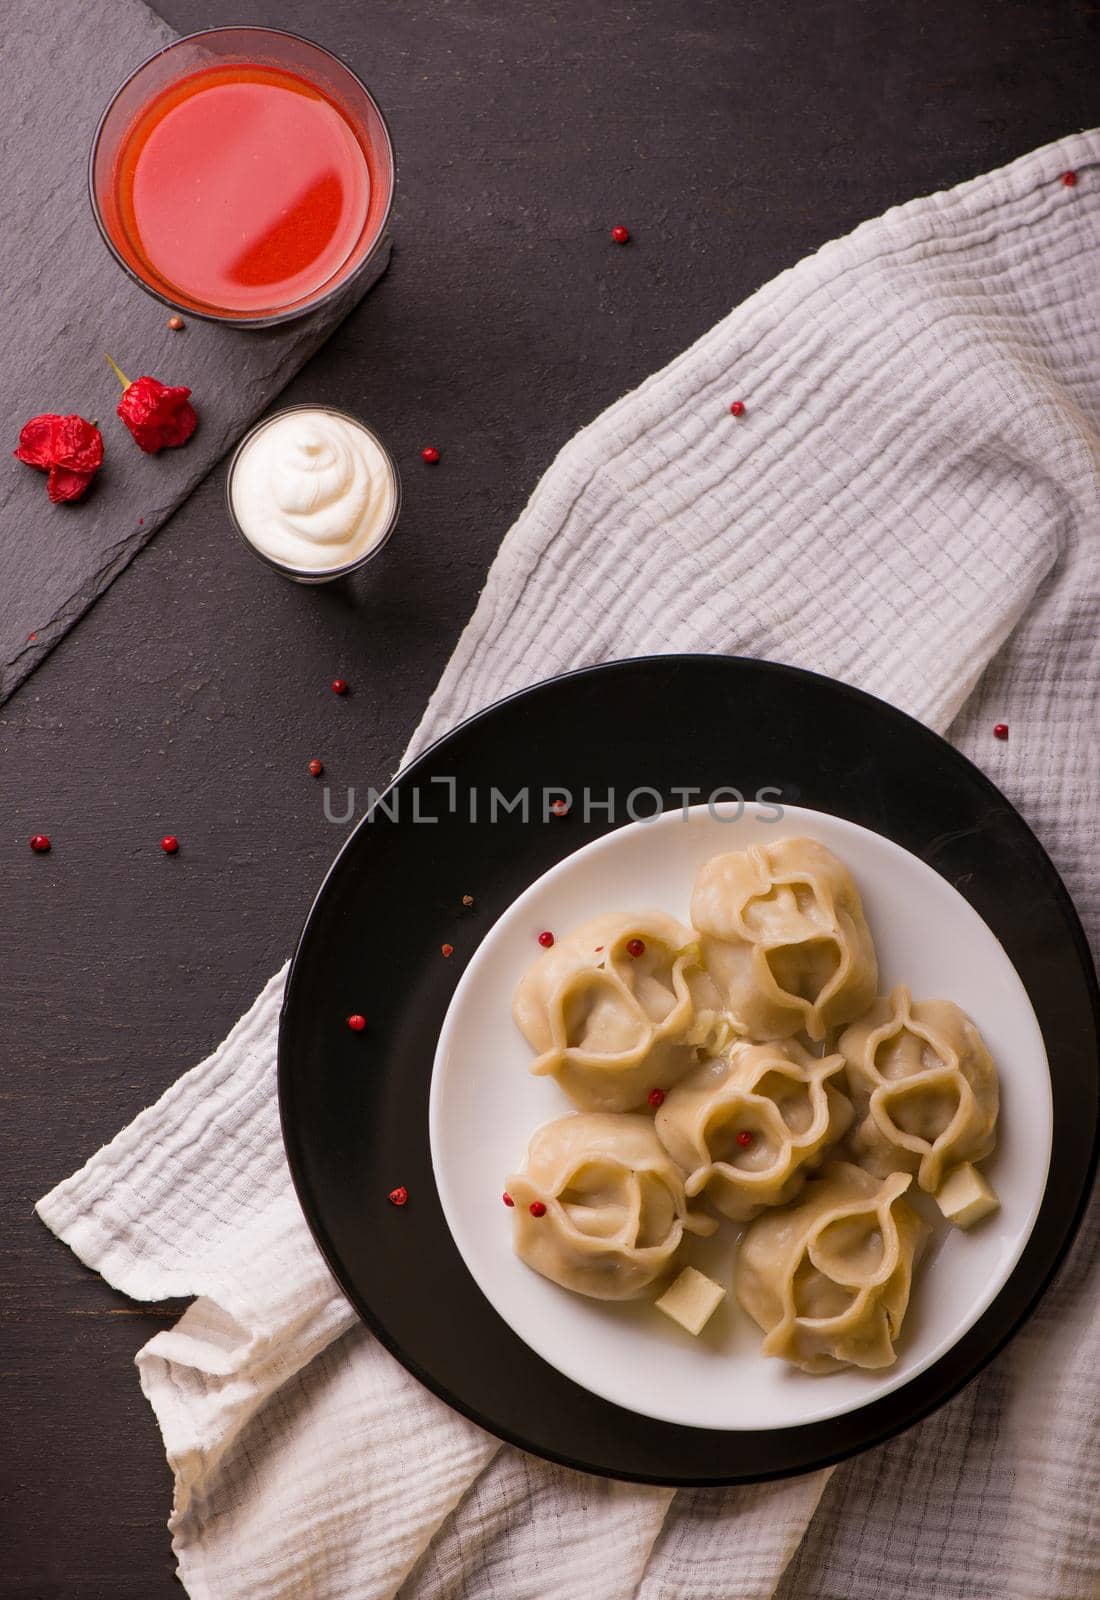 Manti or manty dumplings in a traditional bowl on wooden table